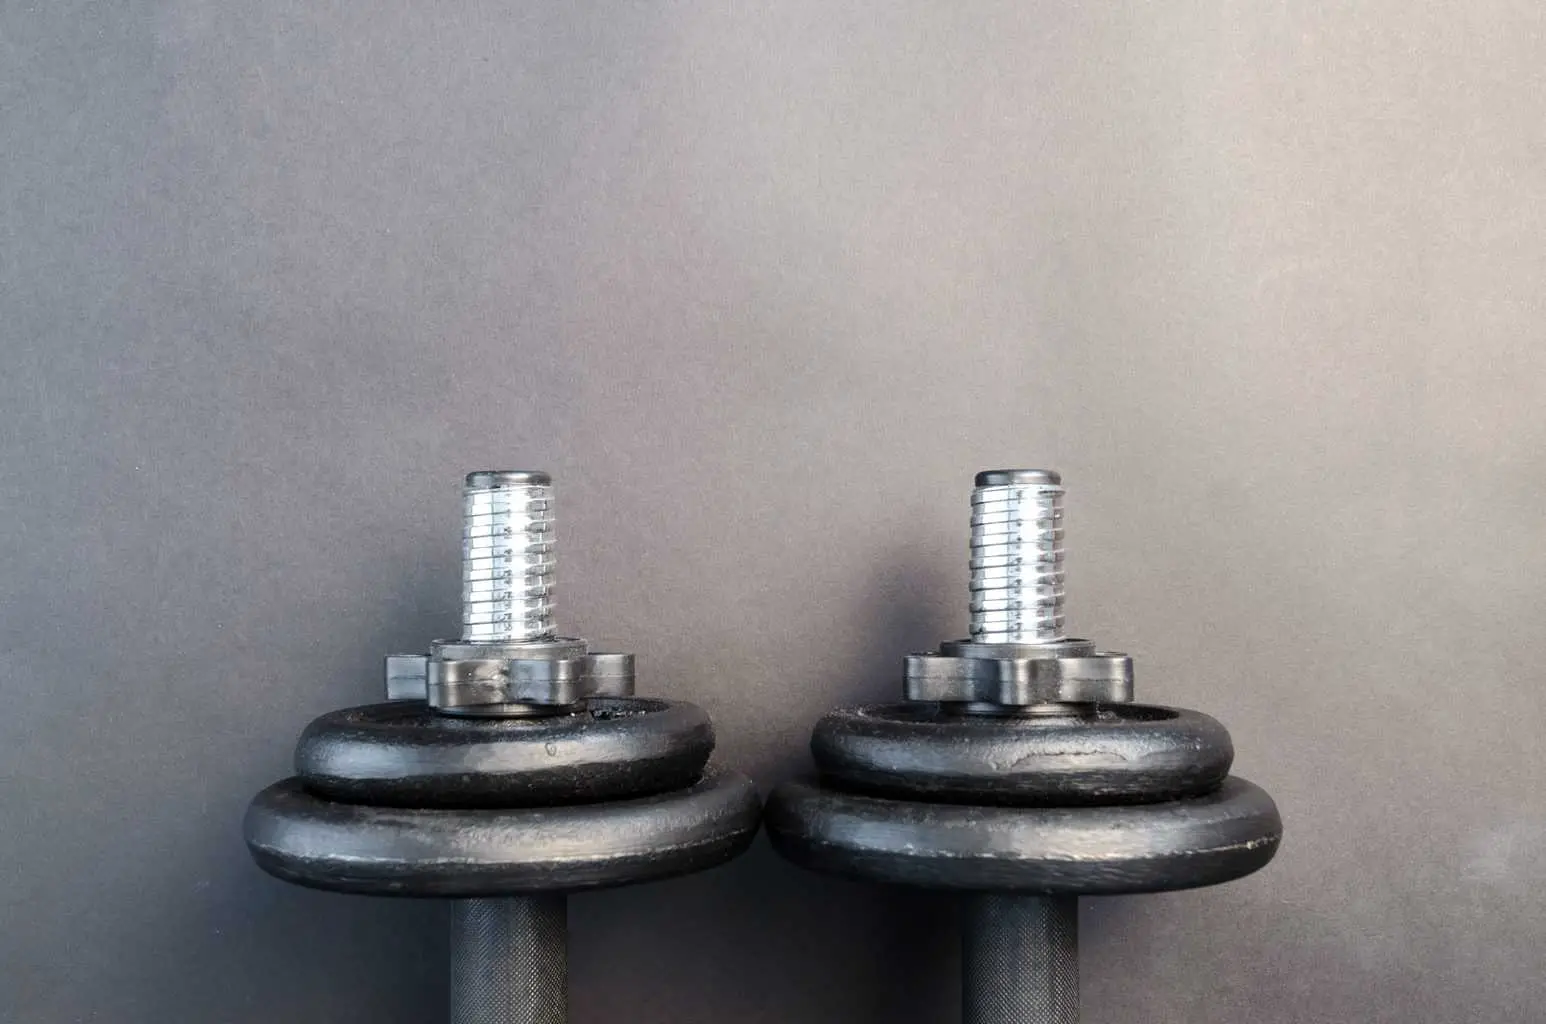 A pair of dumbbell weights